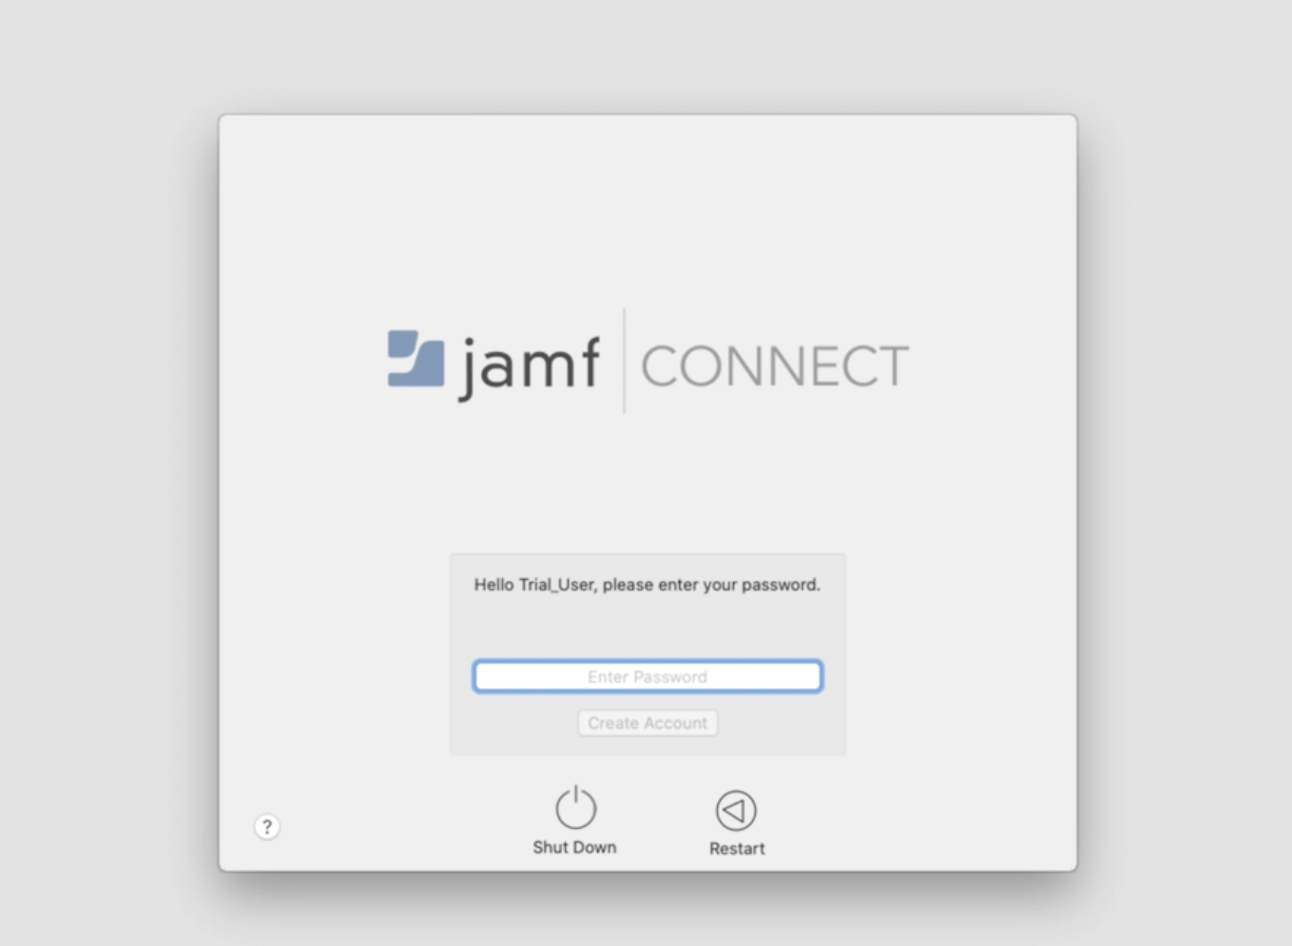 Jamf Connect bef0ee40-bb65-4fca-a07f-8599d5c2216b.png